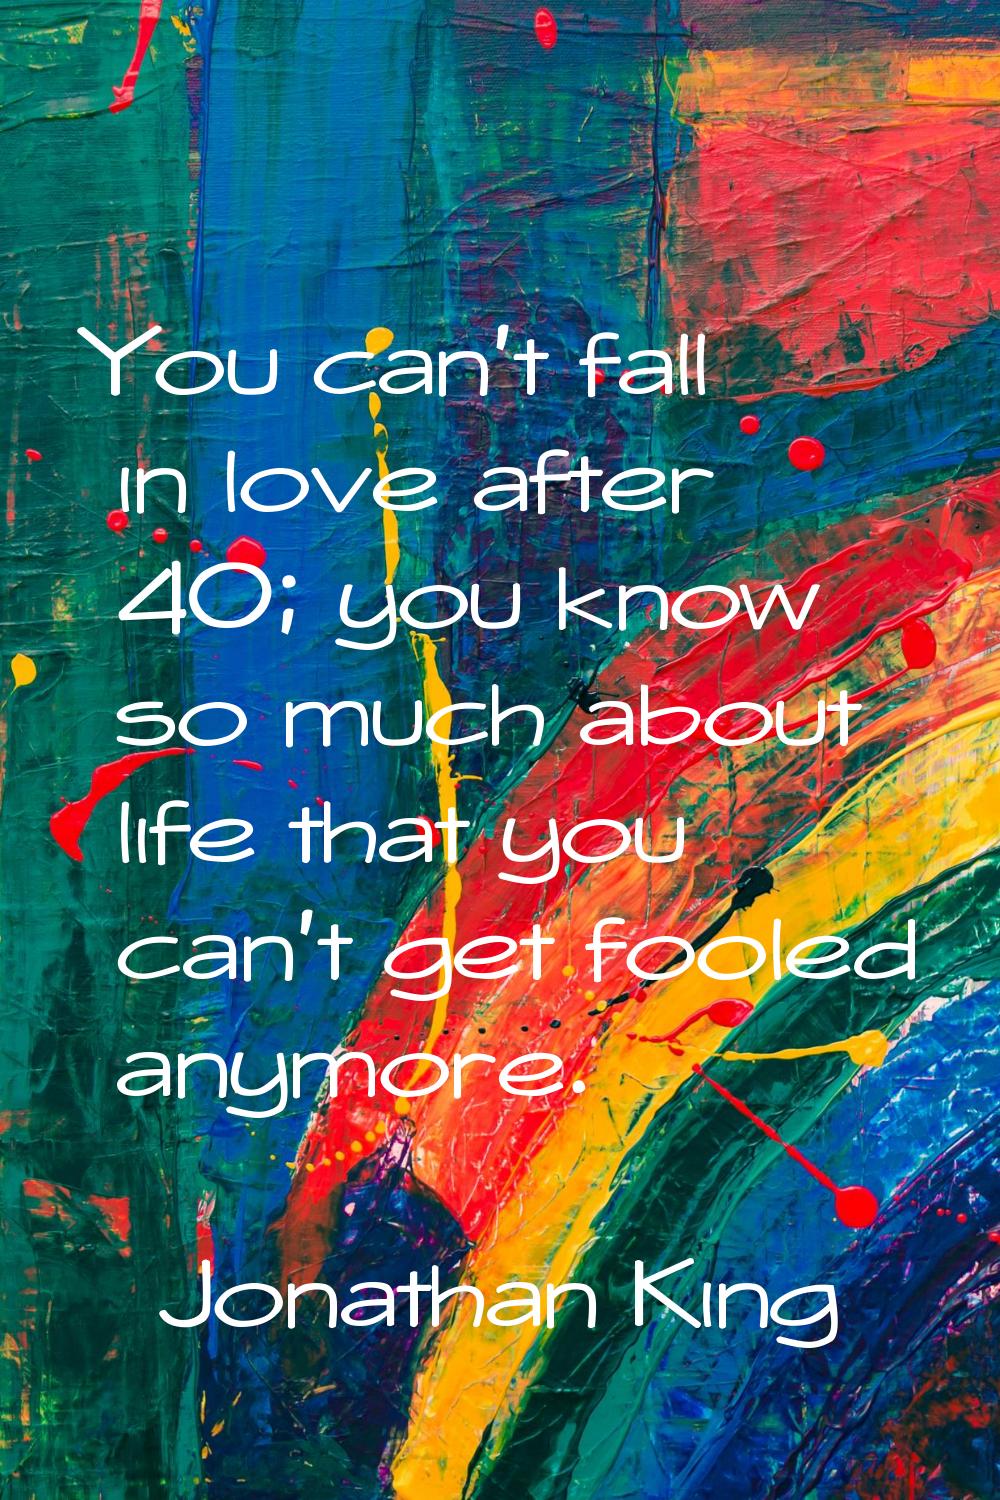 You can't fall in love after 40; you know so much about life that you can't get fooled anymore.